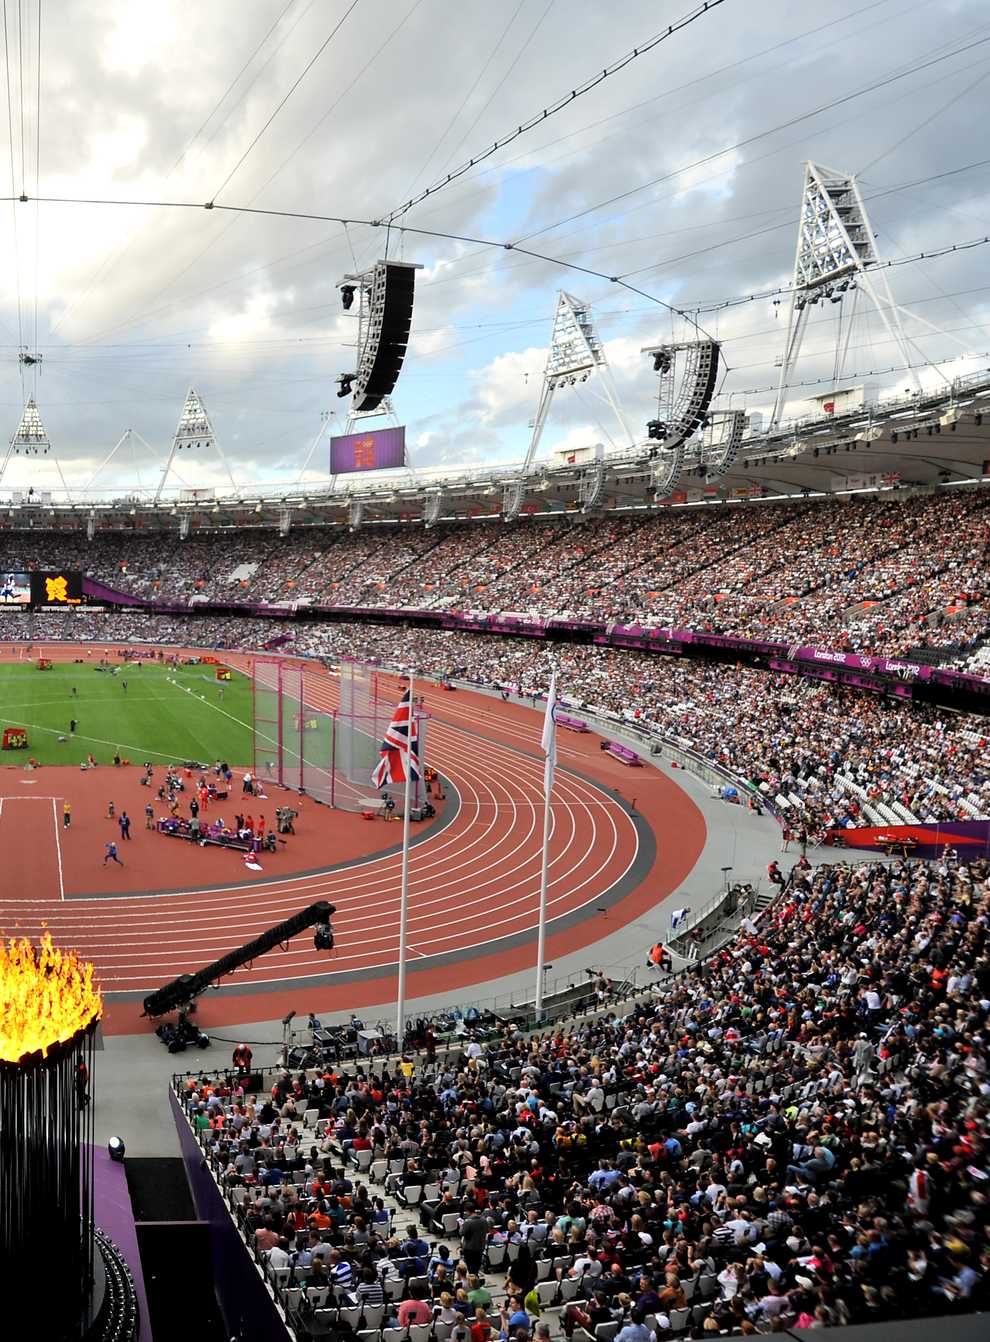 London will mark the ten-year anniversary of hosting the Olympic Games with the lighting of a flame as part of a day of events (Scott Wilson/PA)